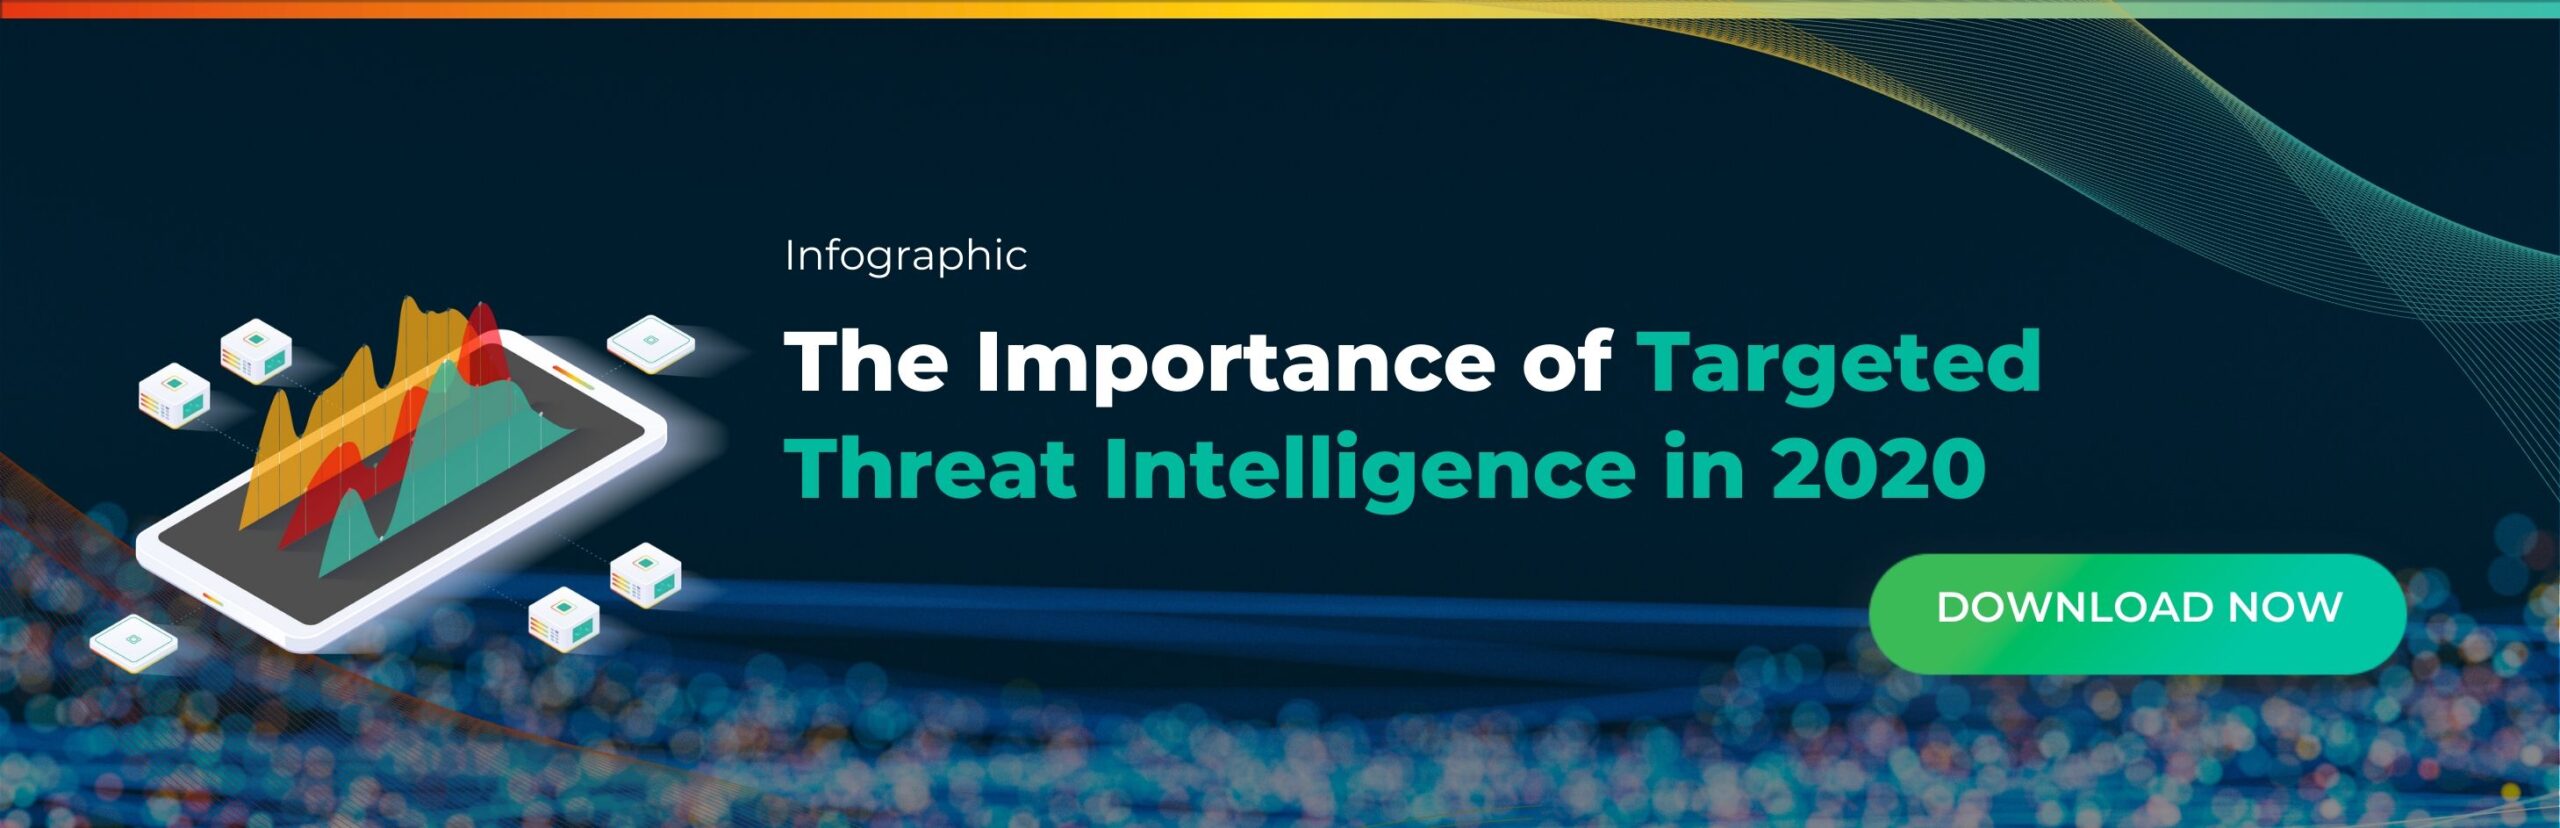 Infographic Targeted Threat Intel